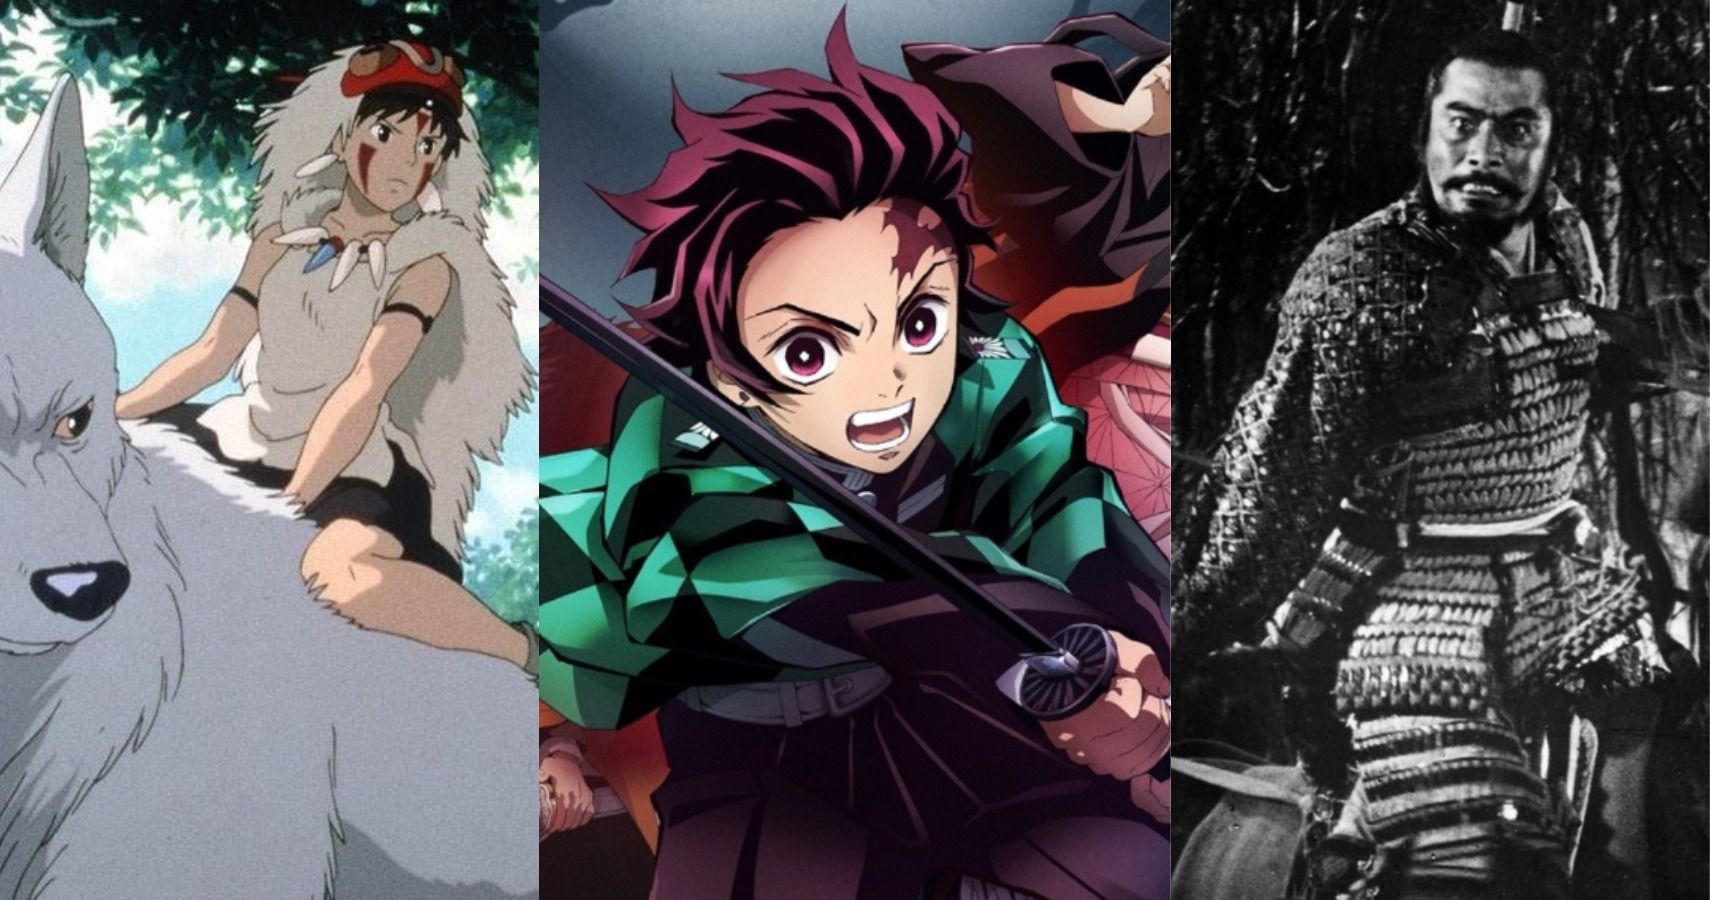 Demon Slayer 10 Classic Japanese Films You Need To Watch If You Enjoy The Anime